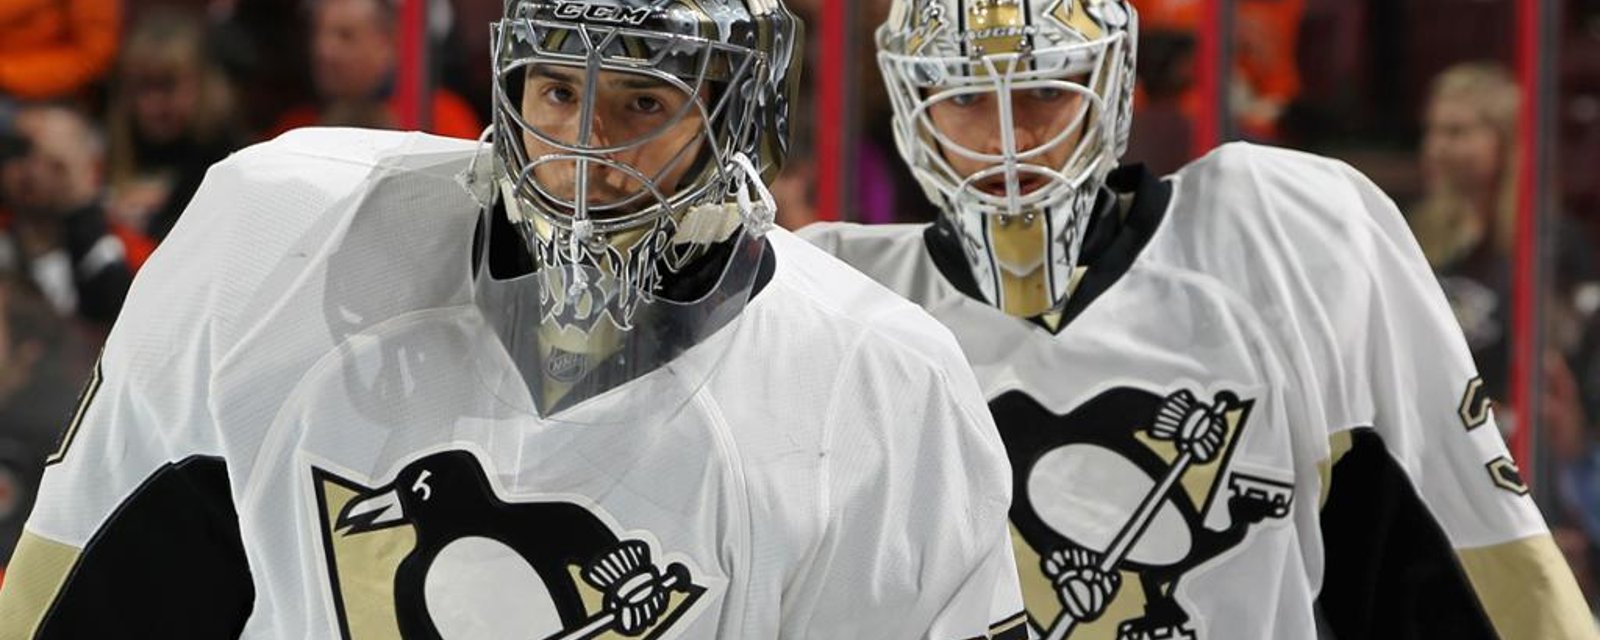 Goaltending Duo: Who Stays And Who Leaves?